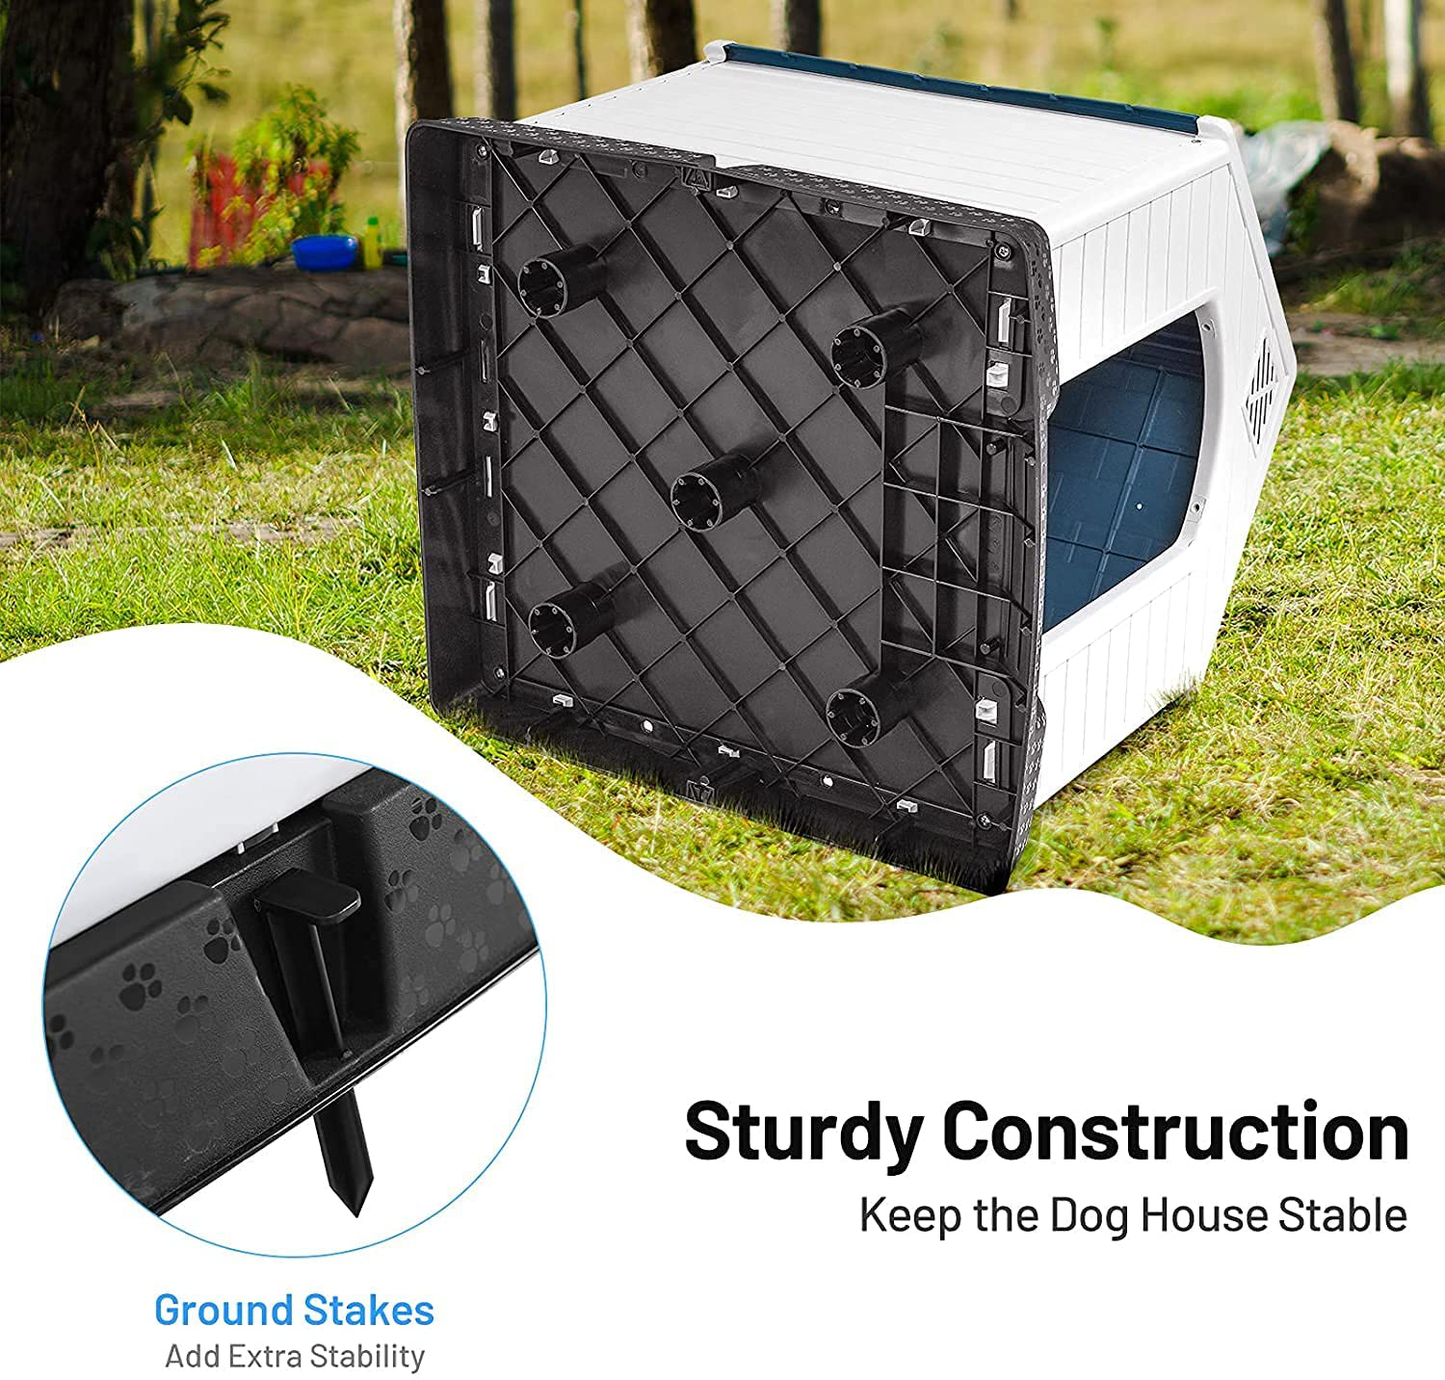 Large Dog House for Large Medium Dogs 34X33X31 Inches Indoor & Outdoor Use Durable Waterproof with Air Vents and Elevated Floor Dog Houses - Easy to Assemble Puppy Shelter Kennel for outside Backyards Animals & Pet Supplies > Pet Supplies > Dog Supplies > Dog Houses Toolsempire   